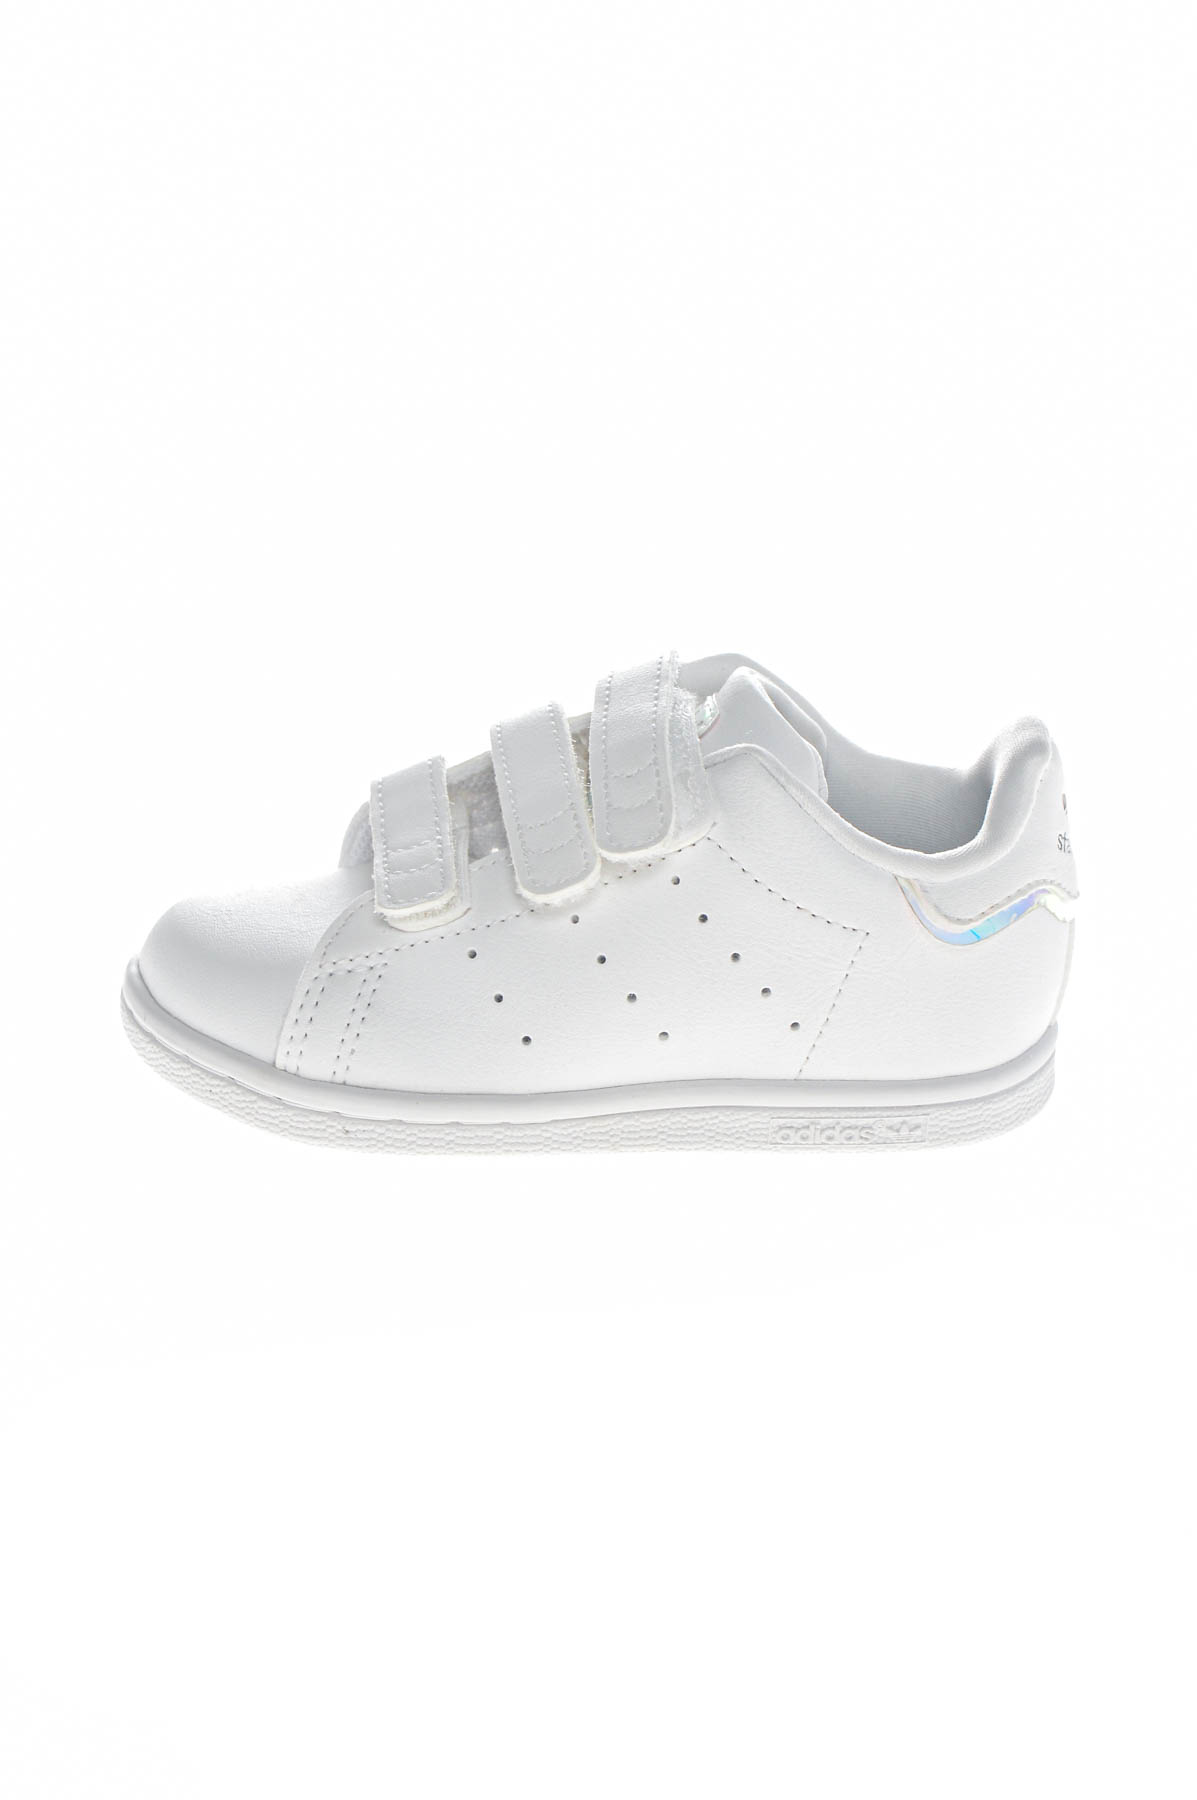 Girl's shoes - Stan Smith x Adidas - 0